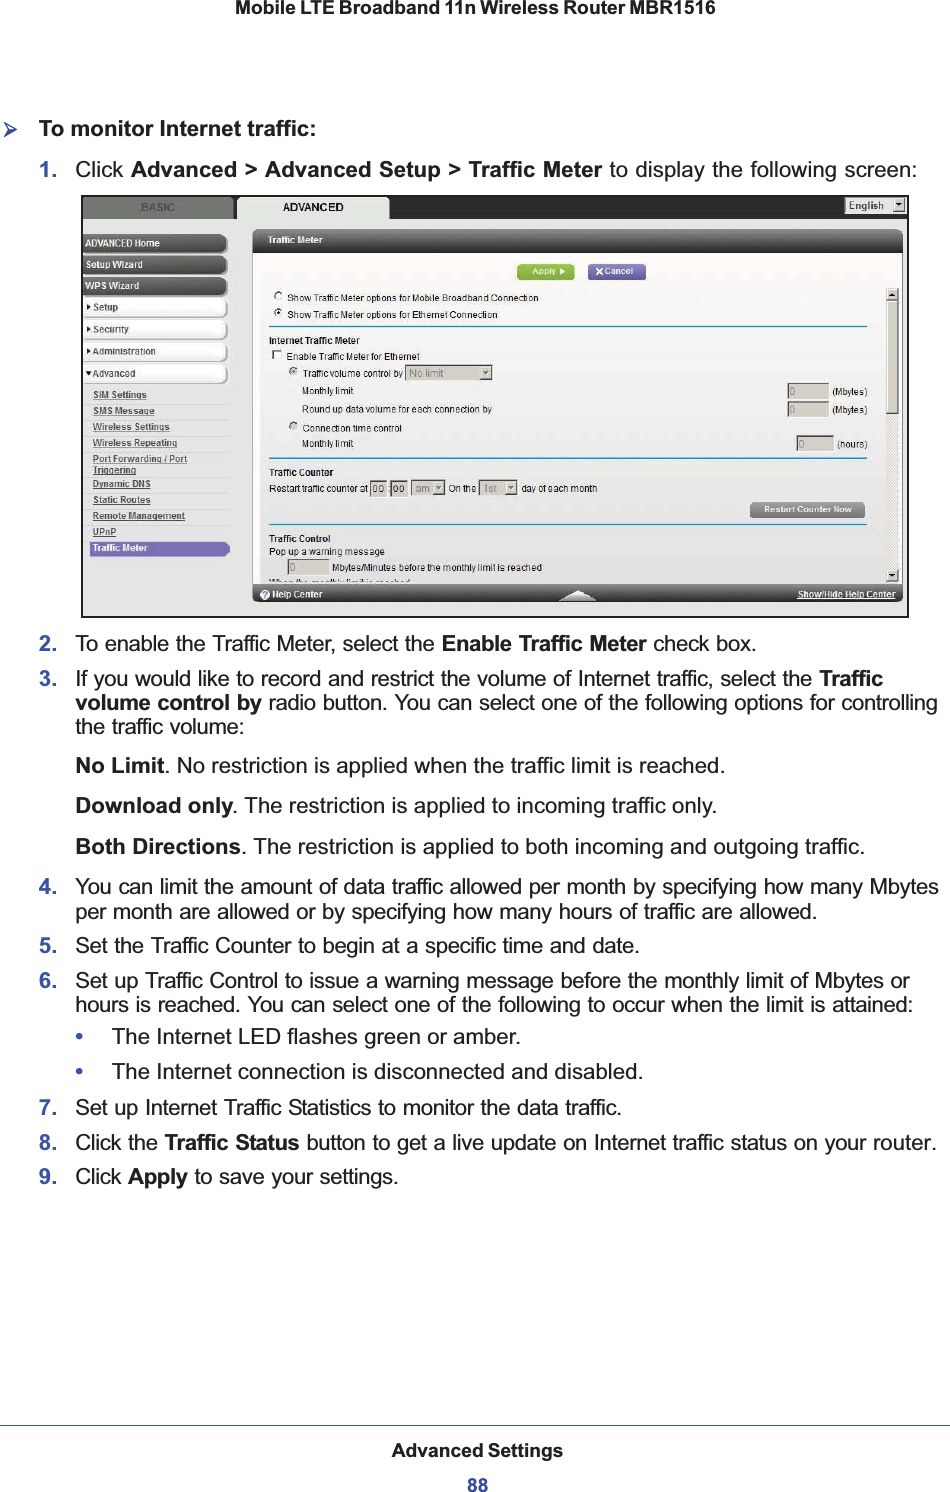 Advanced Settings88Mobile LTE Broadband 11n Wireless Router MBR1516 ¾To monitor Internet traffic:1. Click Advanced &gt; Advanced Setup &gt; Traffic Meter to display the following screen:2. To enable the Traffic Meter, select the Enable Traffic Meter check box.3. If you would like to record and restrict the volume of Internet traffic, select the Traffic volume control by radio button. You can select one of the following options for controlling the traffic volume:No Limit. No restriction is applied when the traffic limit is reached.Download only. The restriction is applied to incoming traffic only.Both Directions. The restriction is applied to both incoming and outgoing traffic.4. You can limit the amount of data traffic allowed per month by specifying how many Mbytes per month are allowed or by specifying how many hours of traffic are allowed.5. Set the Traffic Counter to begin at a specific time and date.6. Set up Traffic Control to issue a warning message before the monthly limit of Mbytes or hours is reached. You can select one of the following to occur when the limit is attained:•The Internet LED flashes green or amber. •The Internet connection is disconnected and disabled.7. Set up Internet Traffic Statistics to monitor the data traffic.8. Click the Traffic Status button to get a live update on Internet traffic status on your router.9. Click Apply to save your settings.